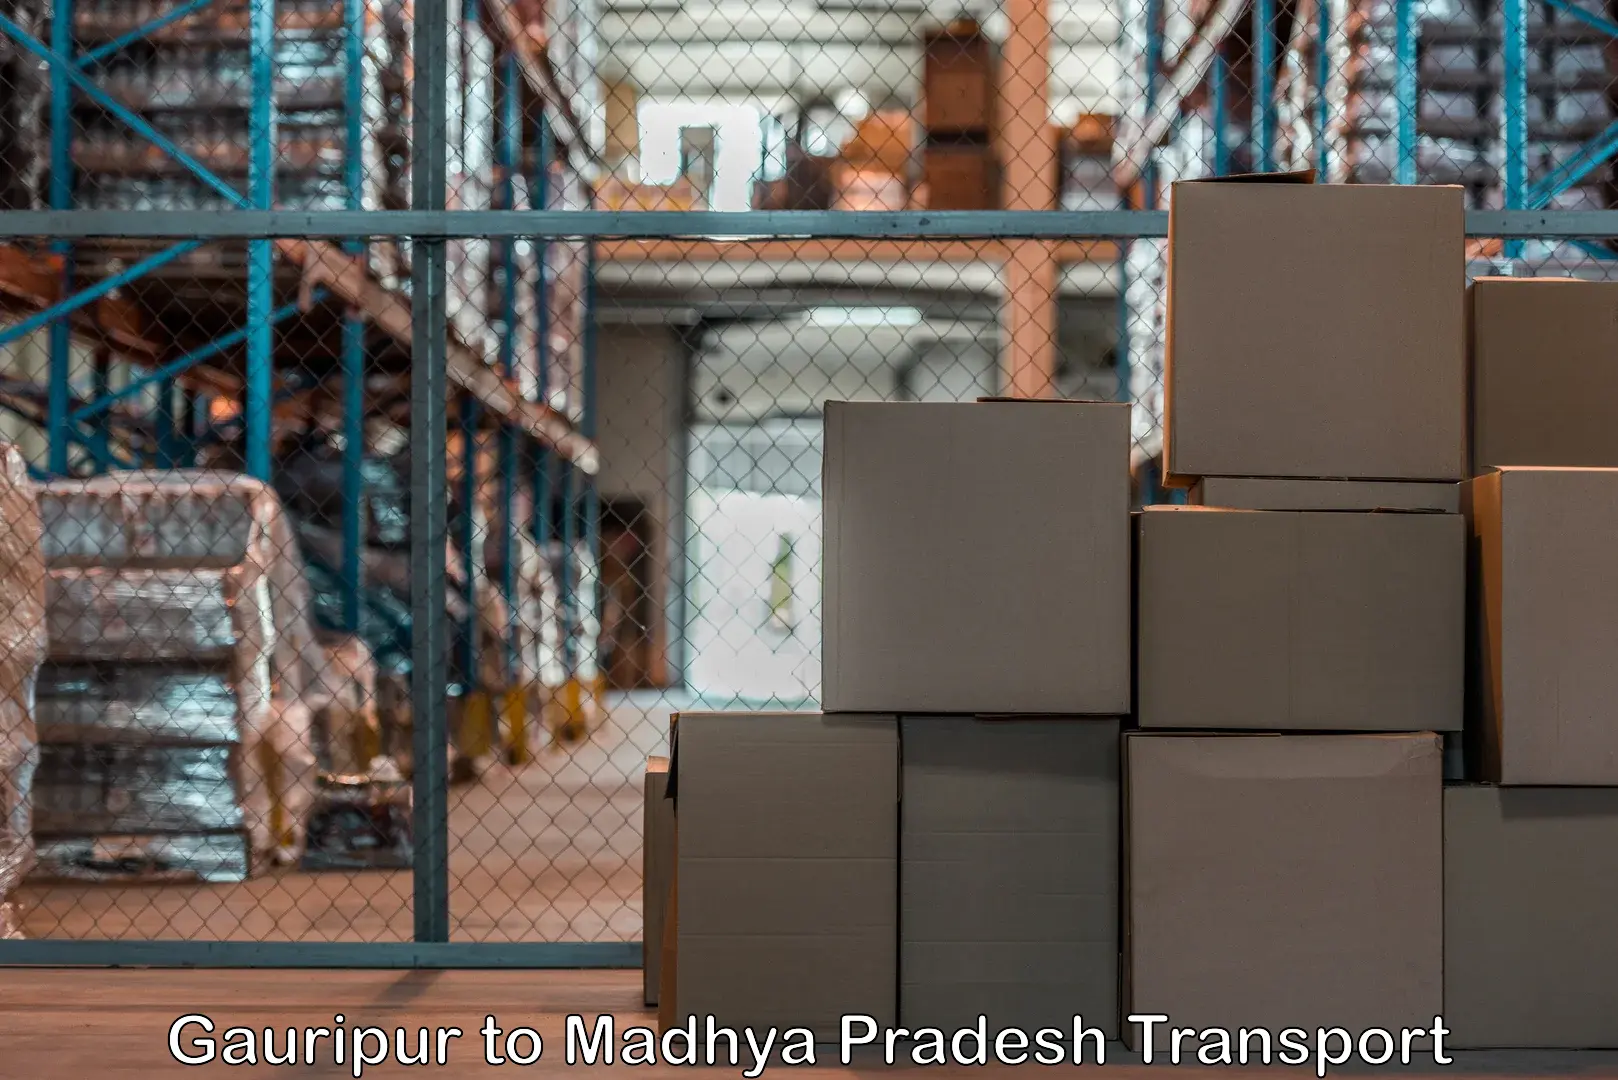 Goods delivery service Gauripur to Niwari